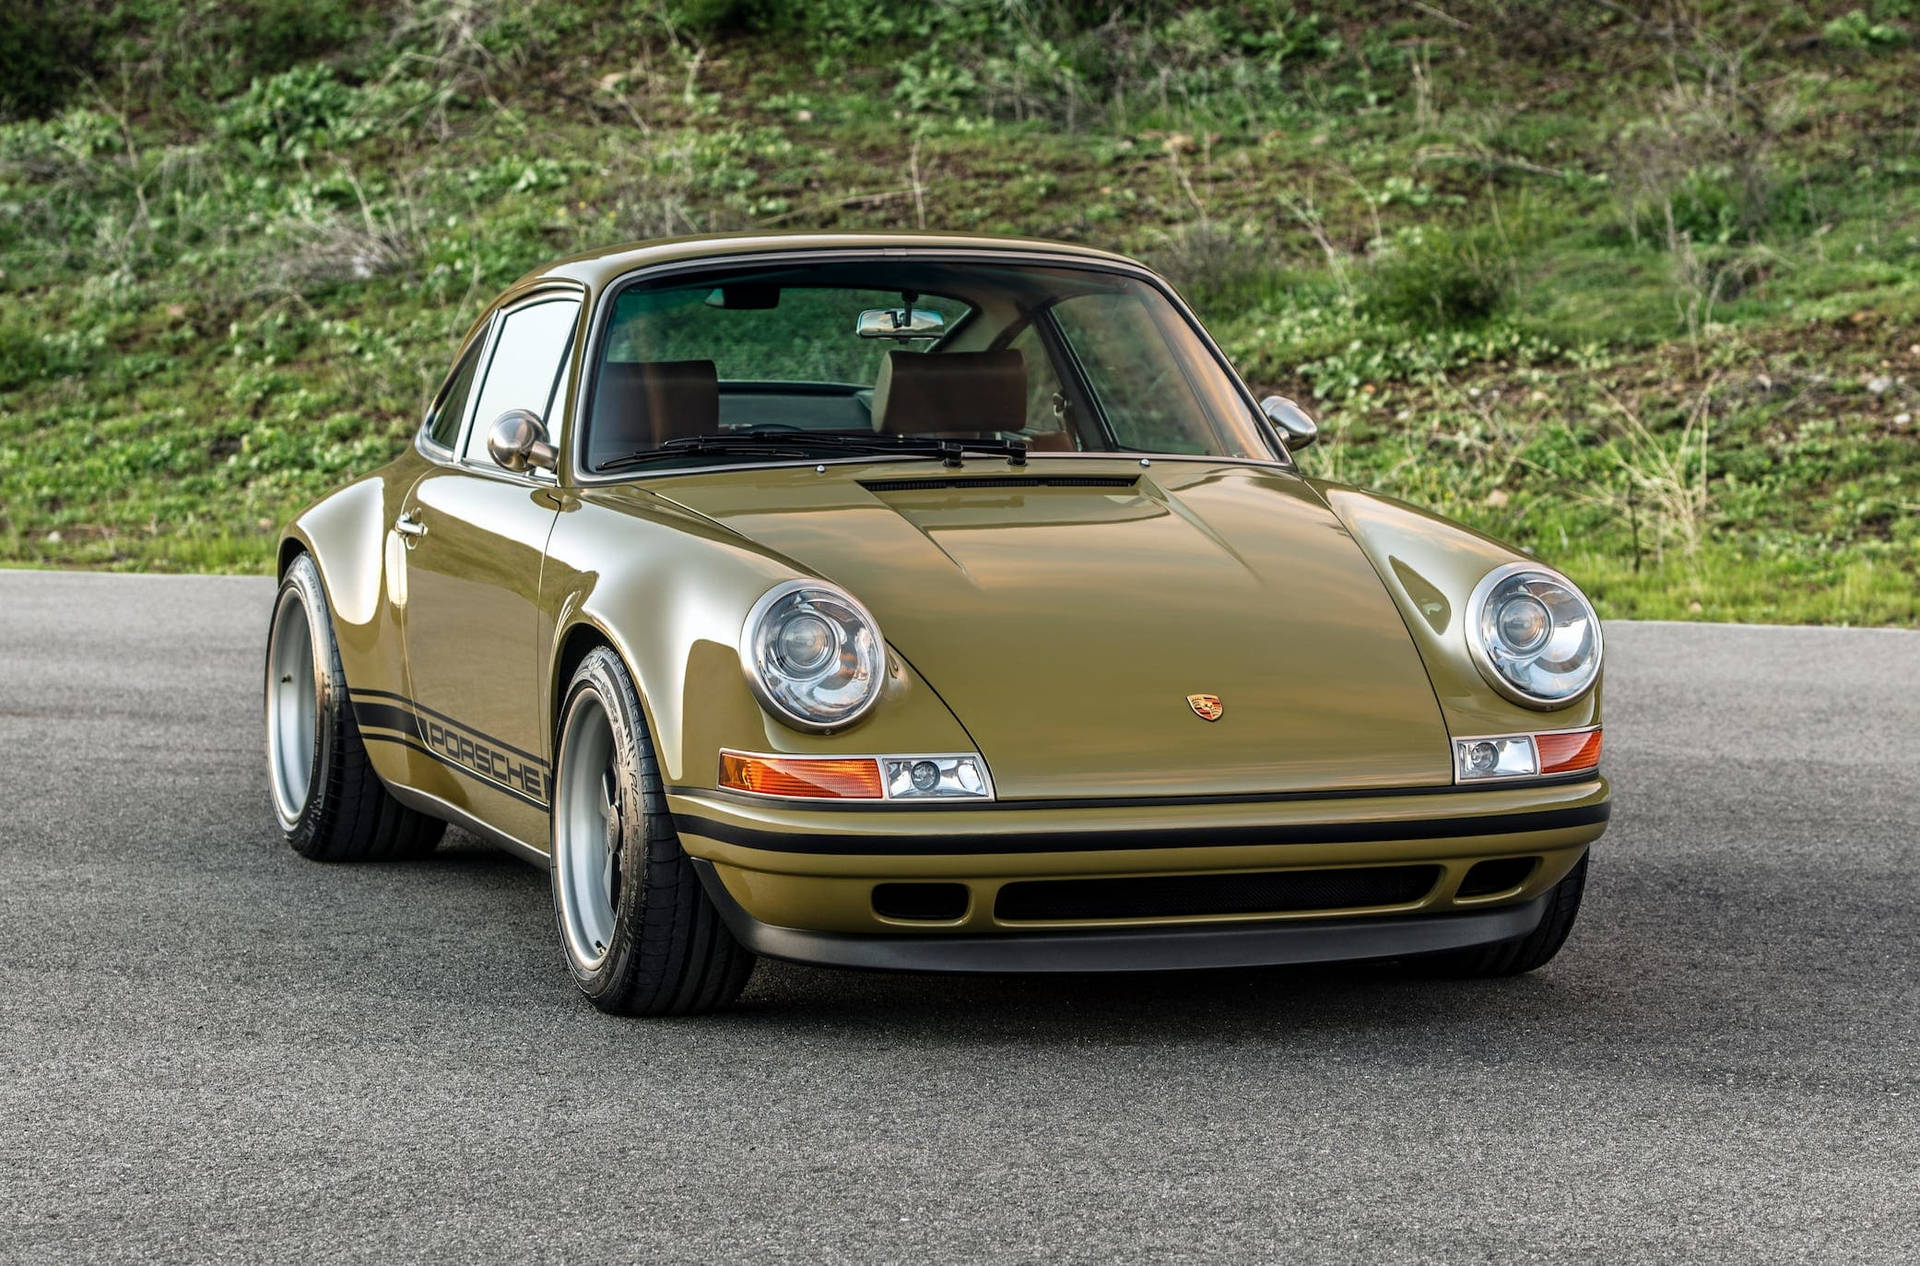 The Exquisite Olive-brown Singer Porsche Showcased In Its Full Glory Background